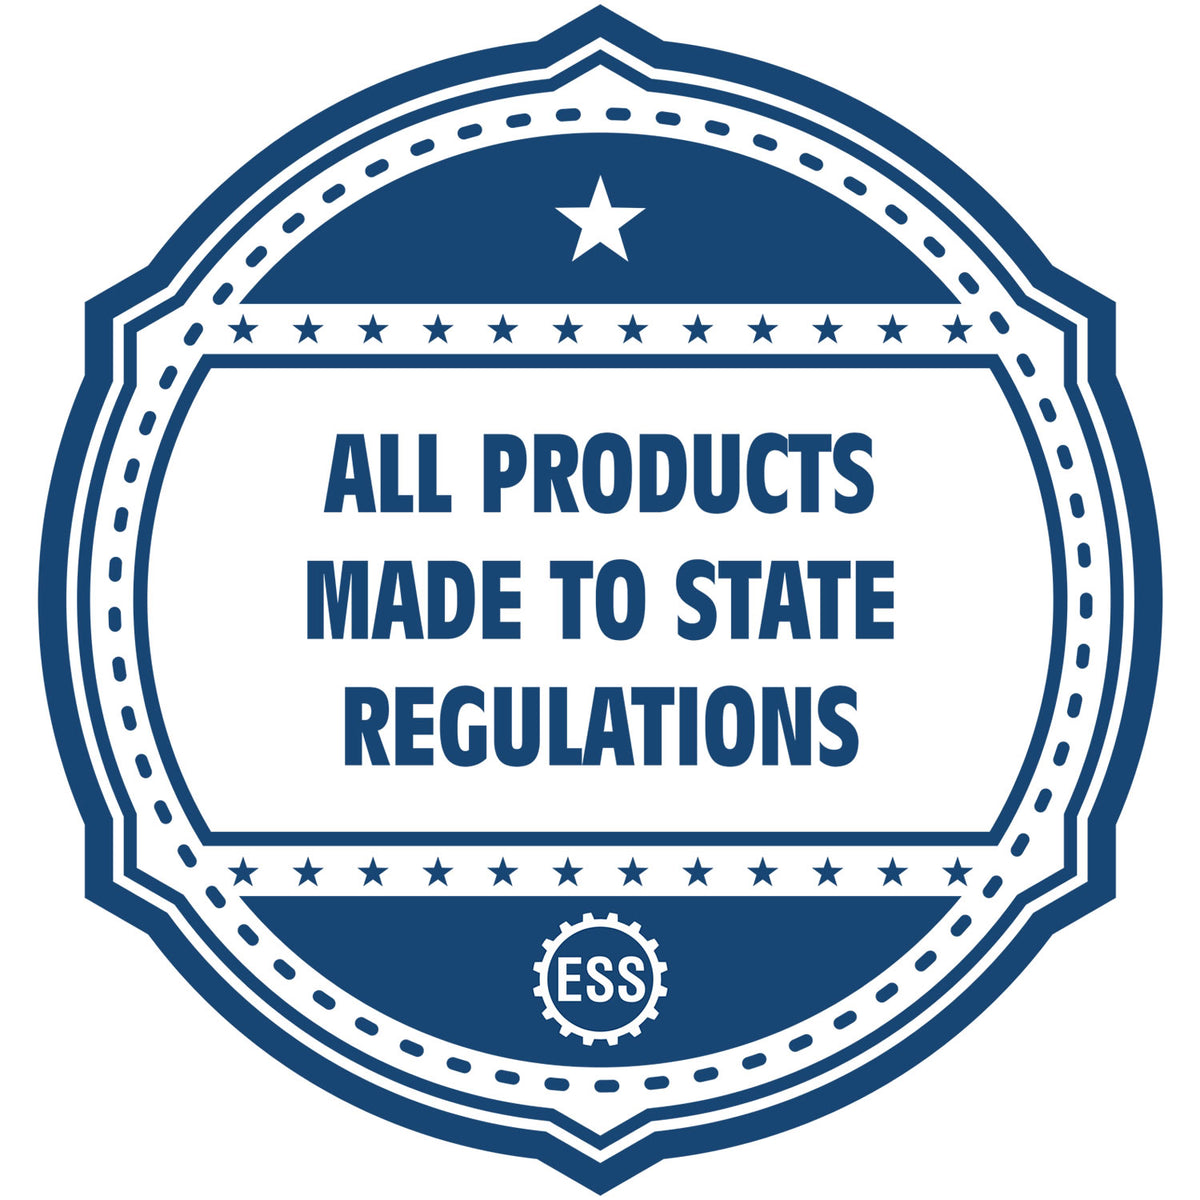 An icon or badge element for the Digital New York PE Stamp and Electronic Seal for New York Engineer showing that this product is made in compliance with state regulations.